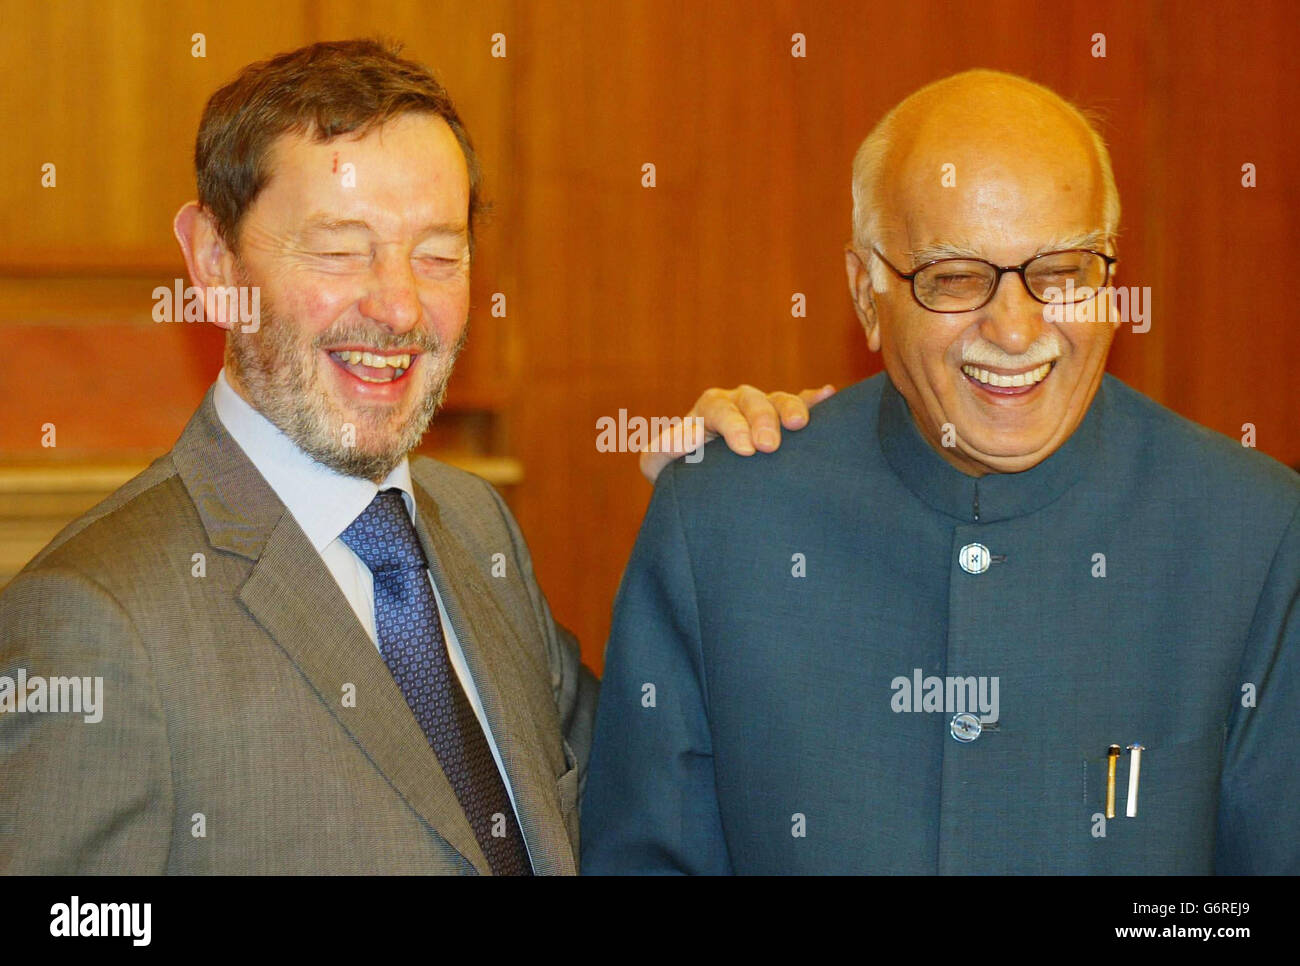 Home Secretary David Blunkett shares a joke with India's Deputy Prime Minister LK Advani at the Home Office in New Delhi. They later signed an agreement for the return of Indian Immigration offenders who disappear when they visit the UK. Stock Photo